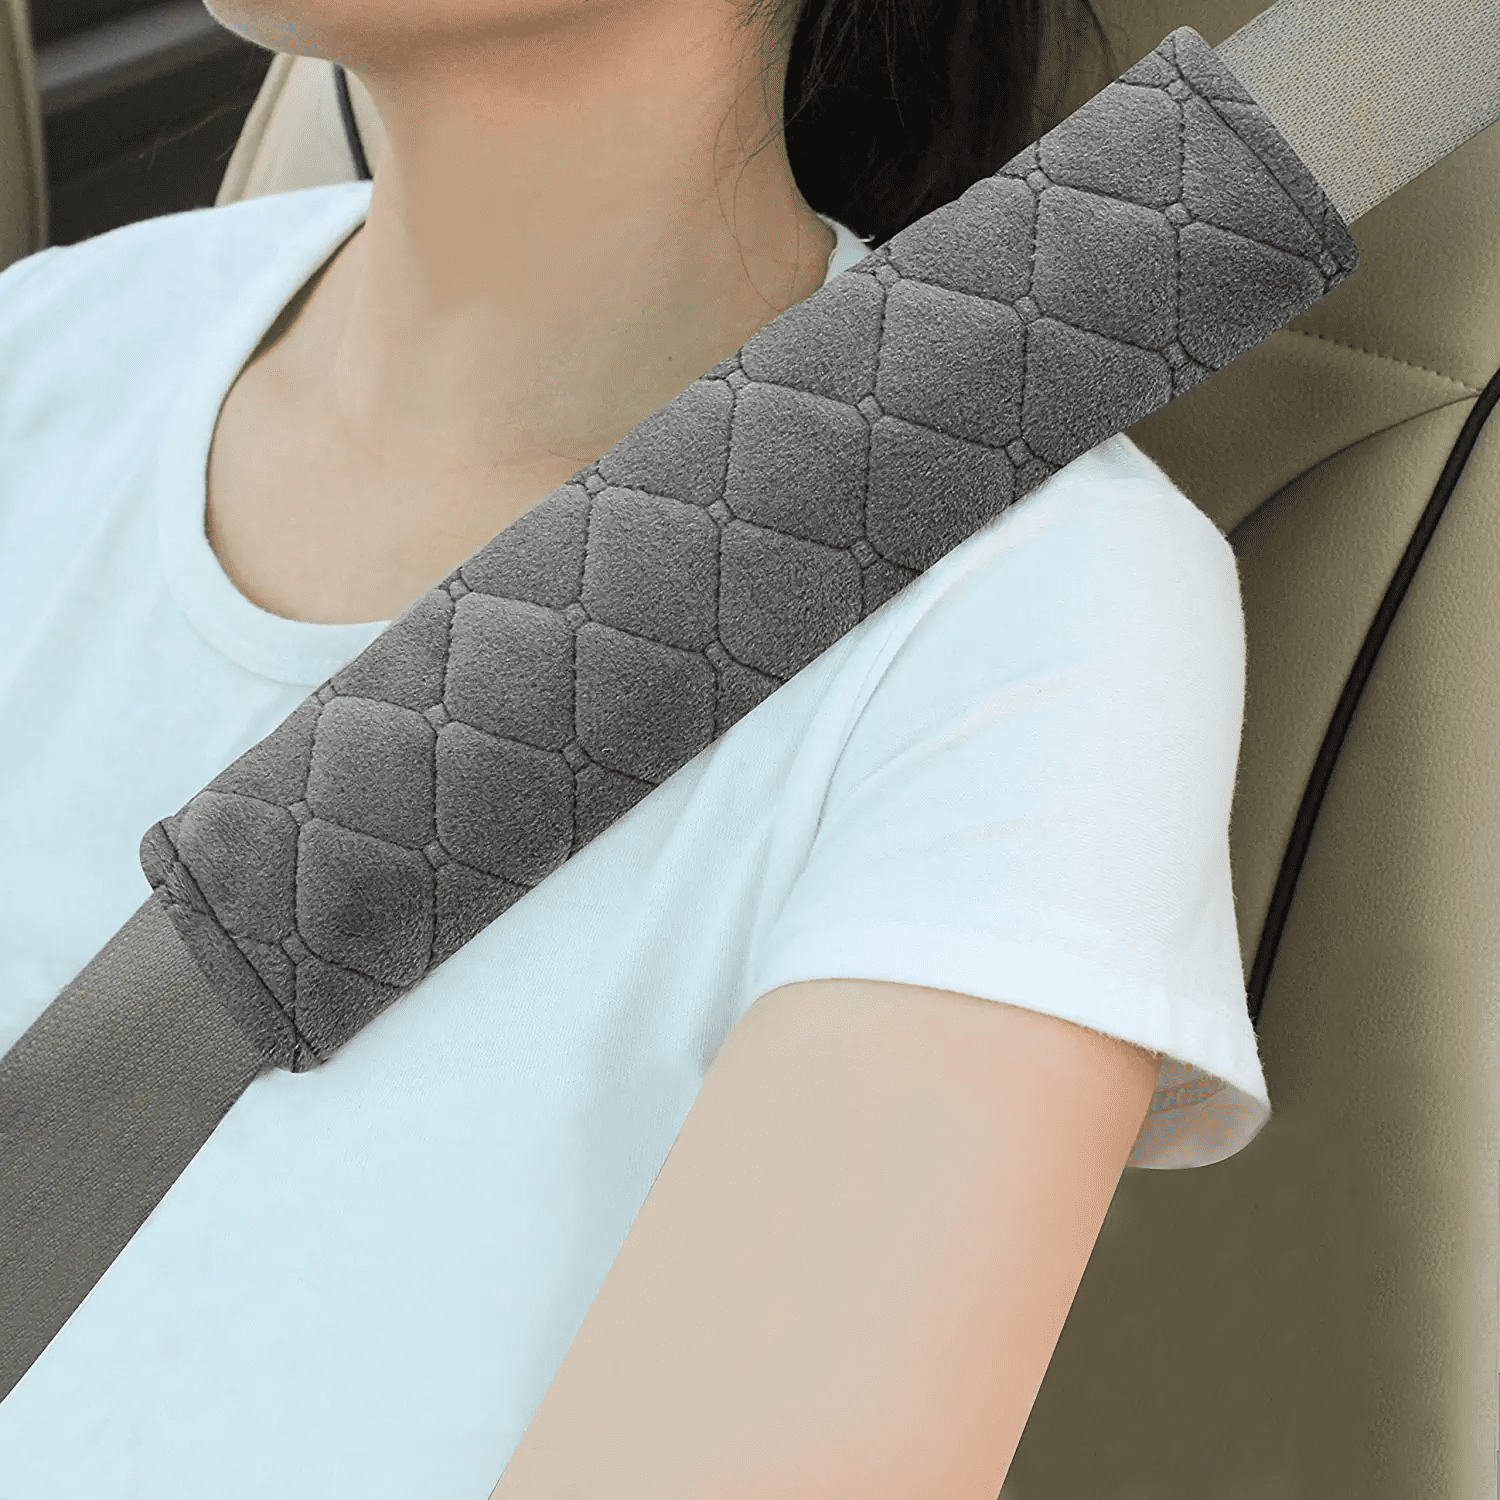 Soft Comfy Seat Belt Pads Covers for Adults Shoulder Belt Pad Protect You Neck from The Seatbelt Rubbing Golden Sea Turtle Plumeria Dolyues Black Car Safety Seatbelt Strap Cover for Women Ladies 